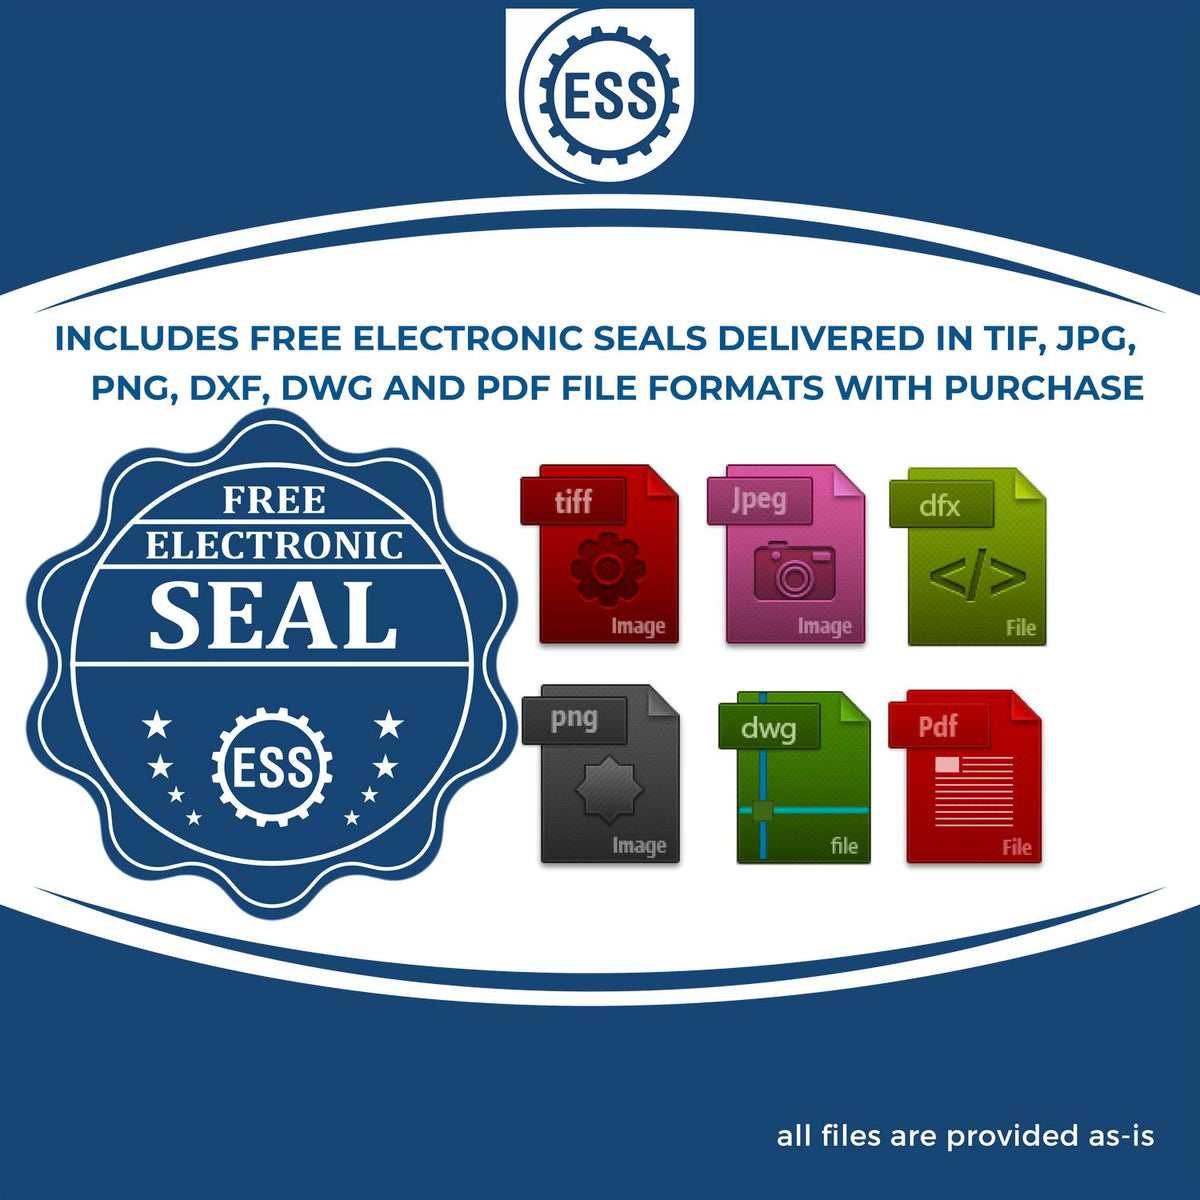 An infographic for the free electronic seal for the Soft Idaho Professional Geologist Seal illustrating the different file type icons such as DXF, DWG, TIF, JPG and PNG.